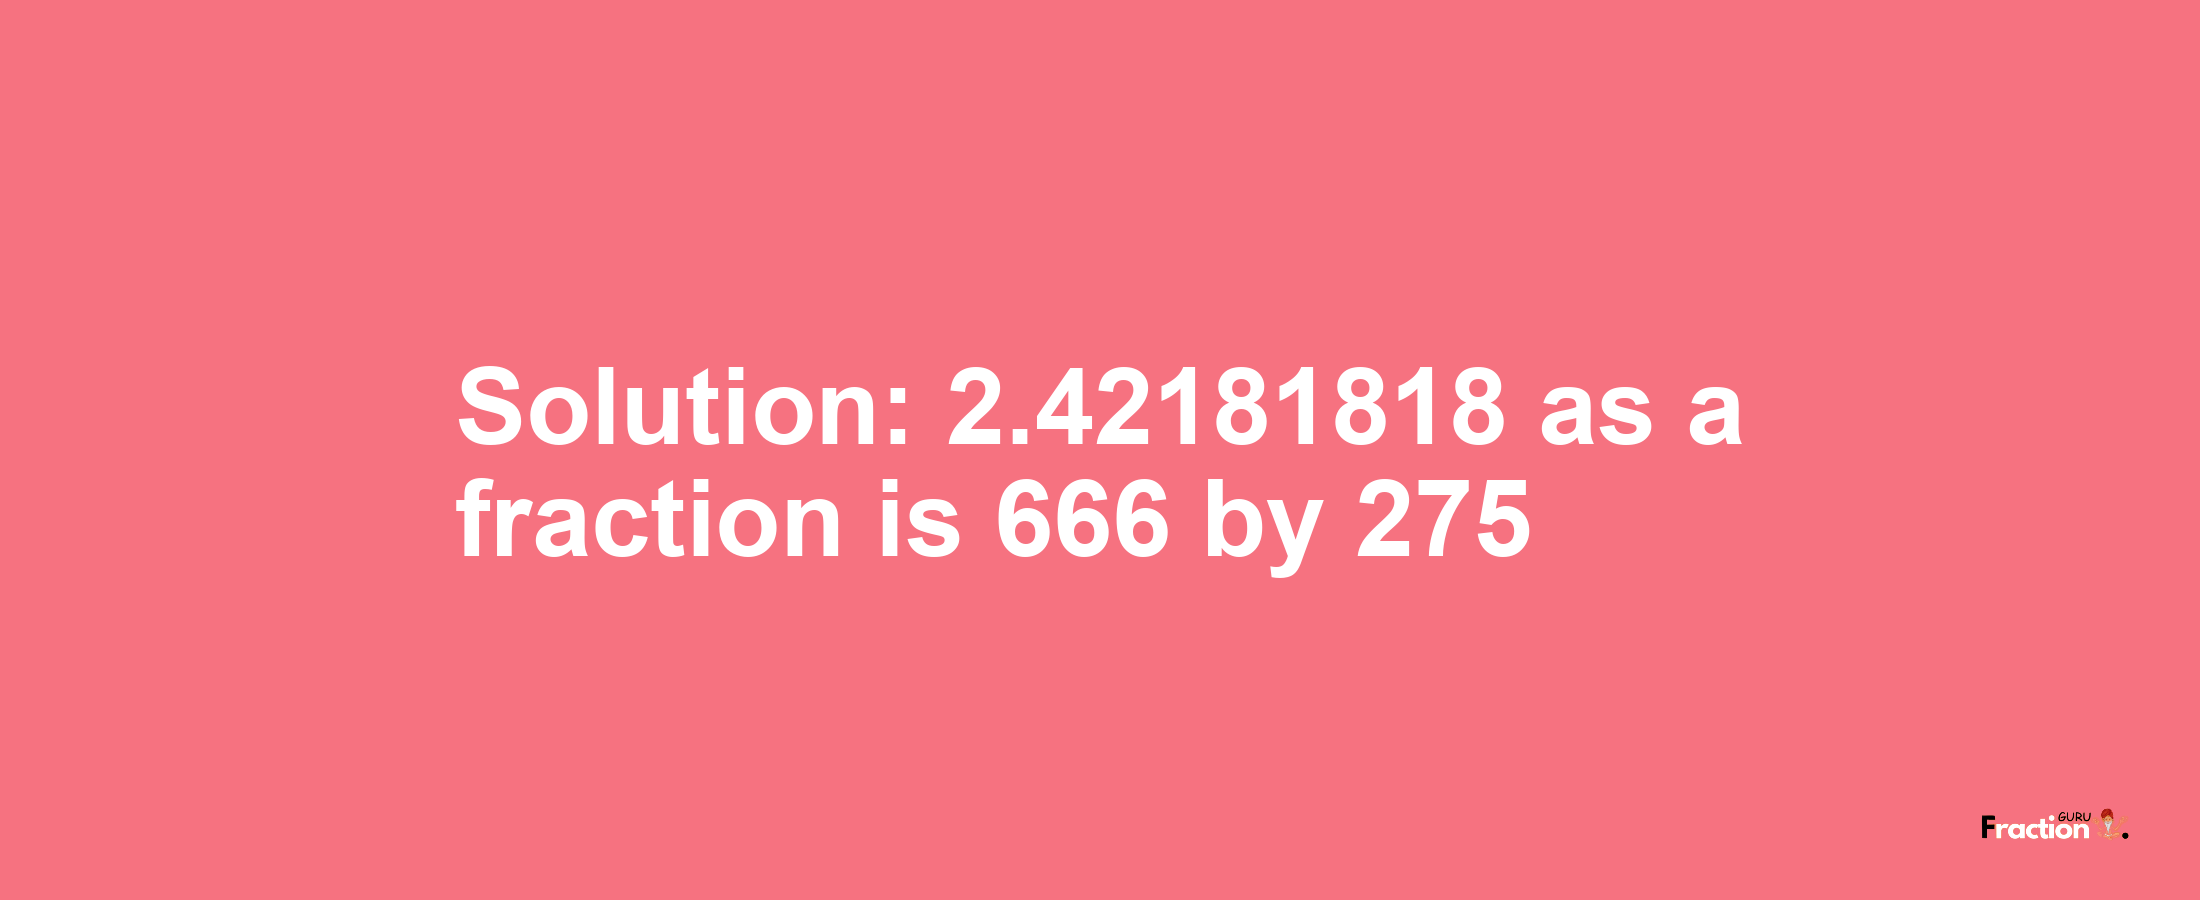 Solution:2.42181818 as a fraction is 666/275